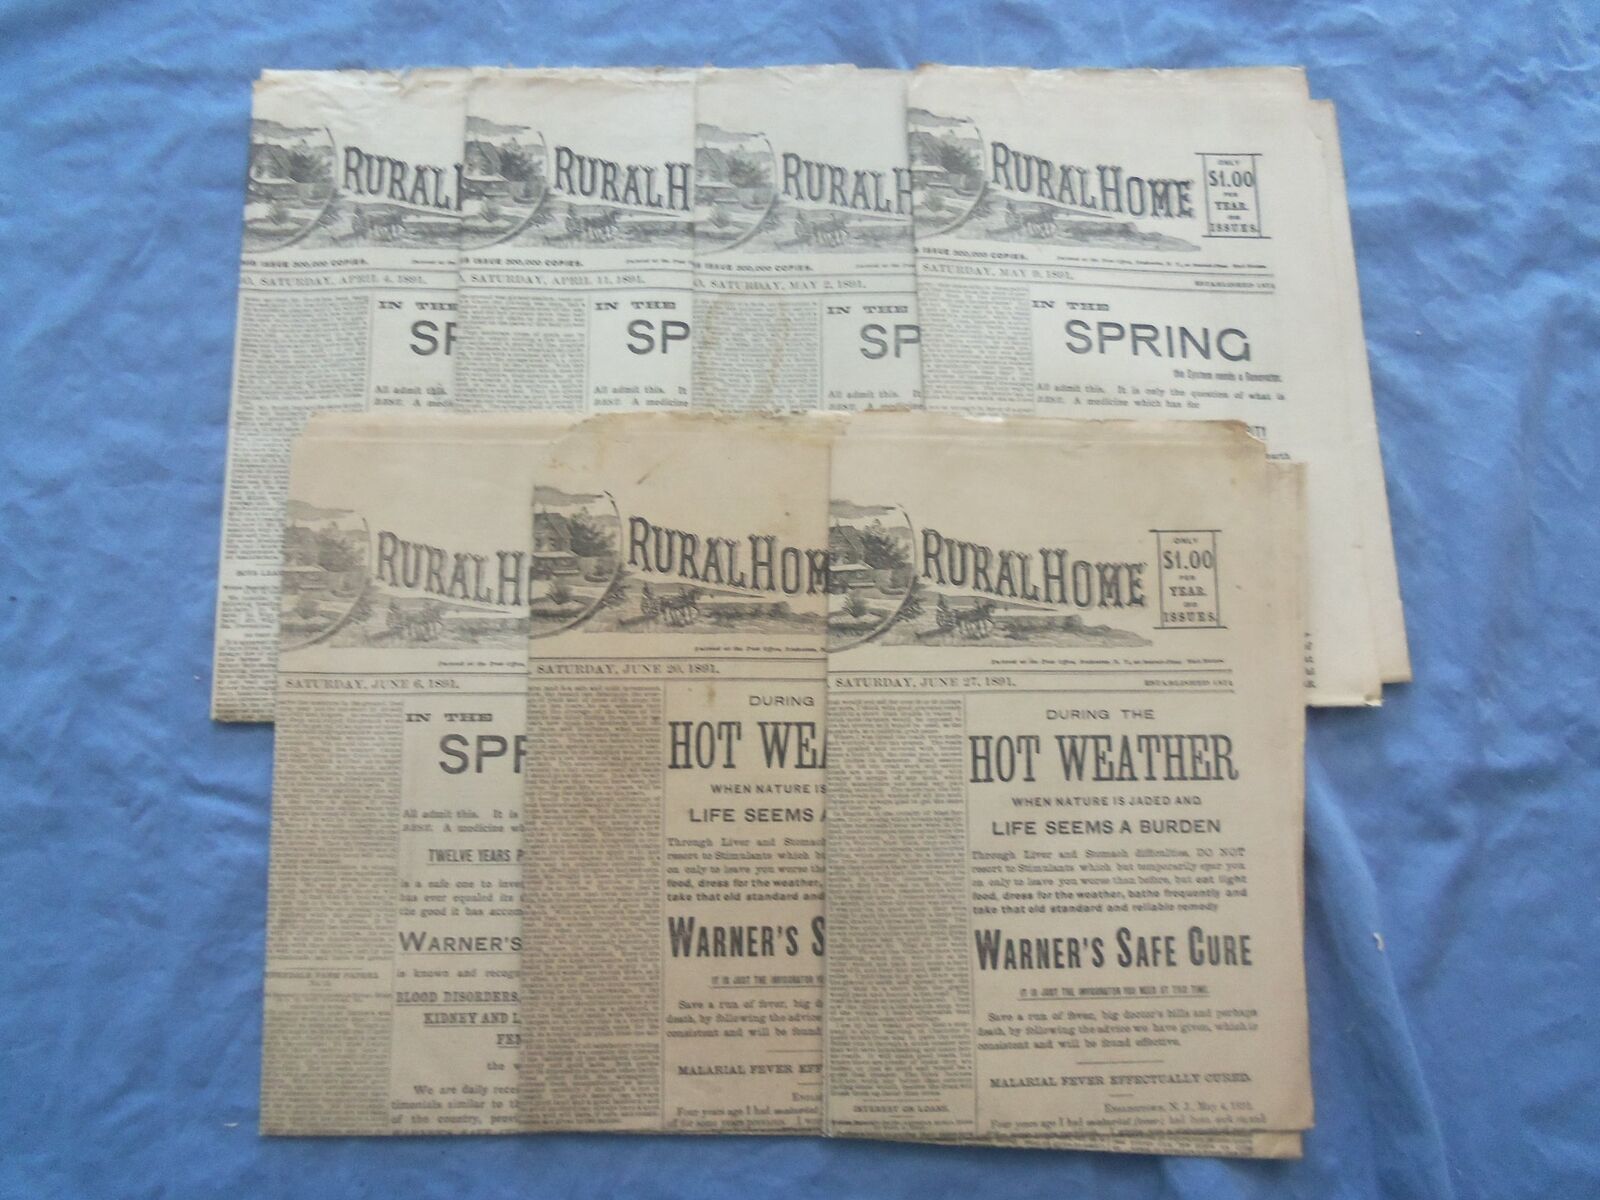 1891 THE AMERICAN RURAL HOME NEWSPAPER - LOT OF 7 - ROCHESTER, NEW YORK - NP 842